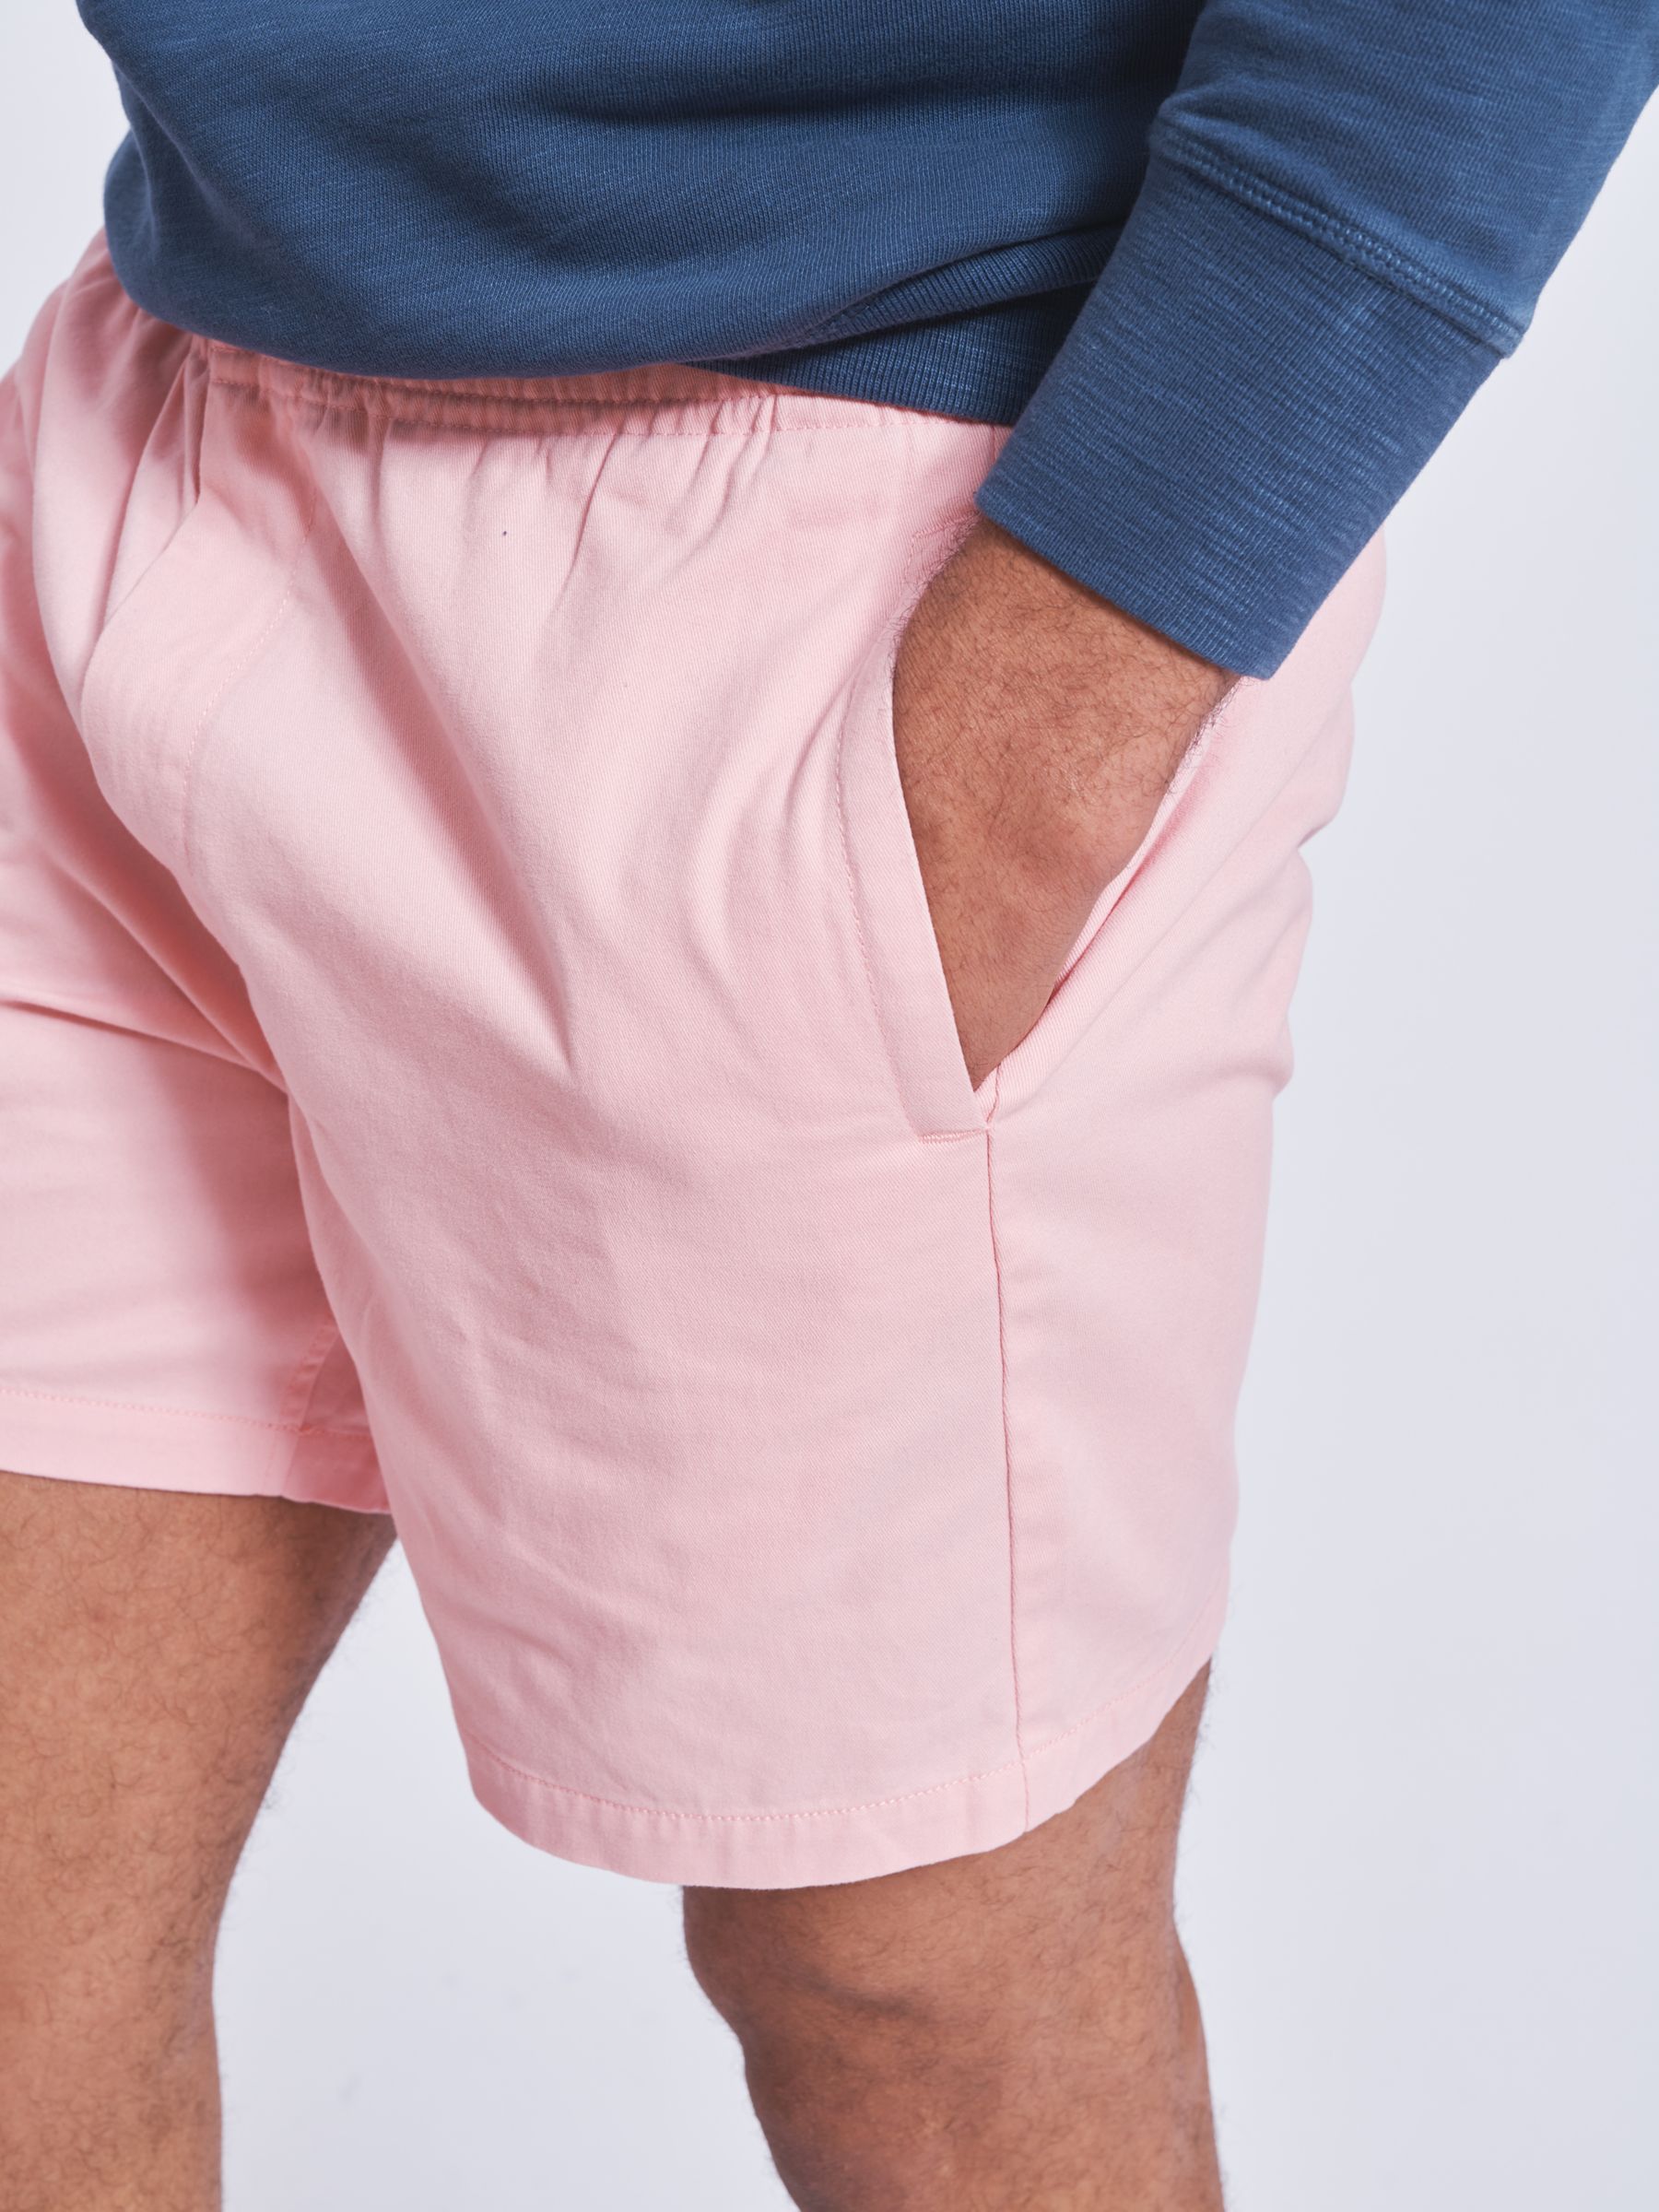 Buy Aubin Wold Rugby Shorts Online at johnlewis.com